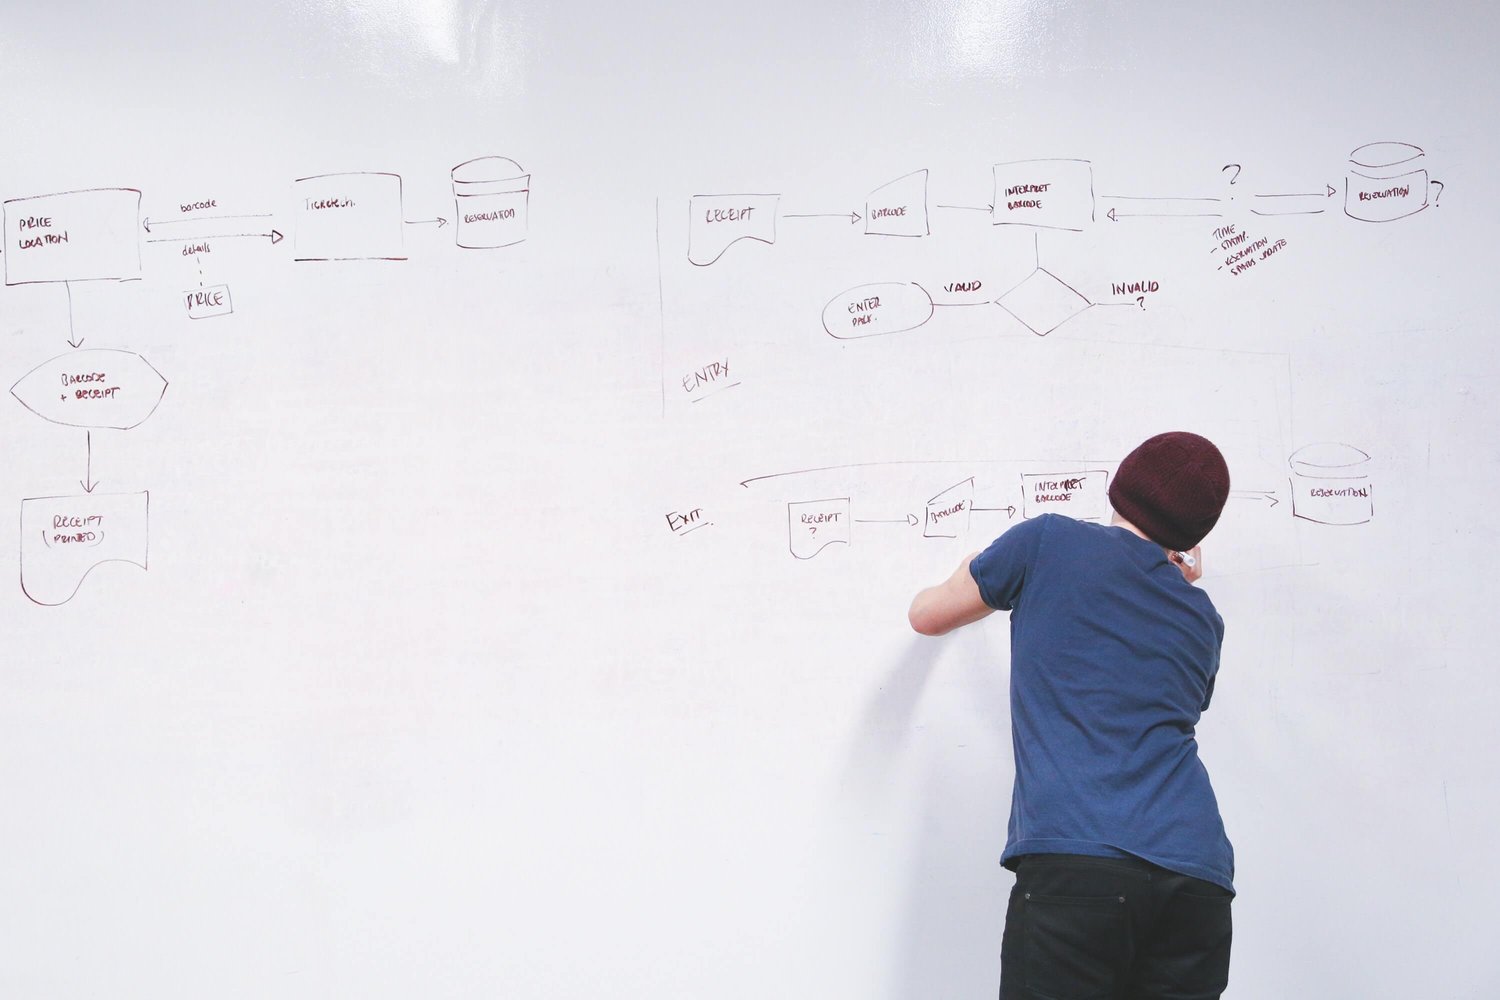 Man mind mapping on whiteboard.